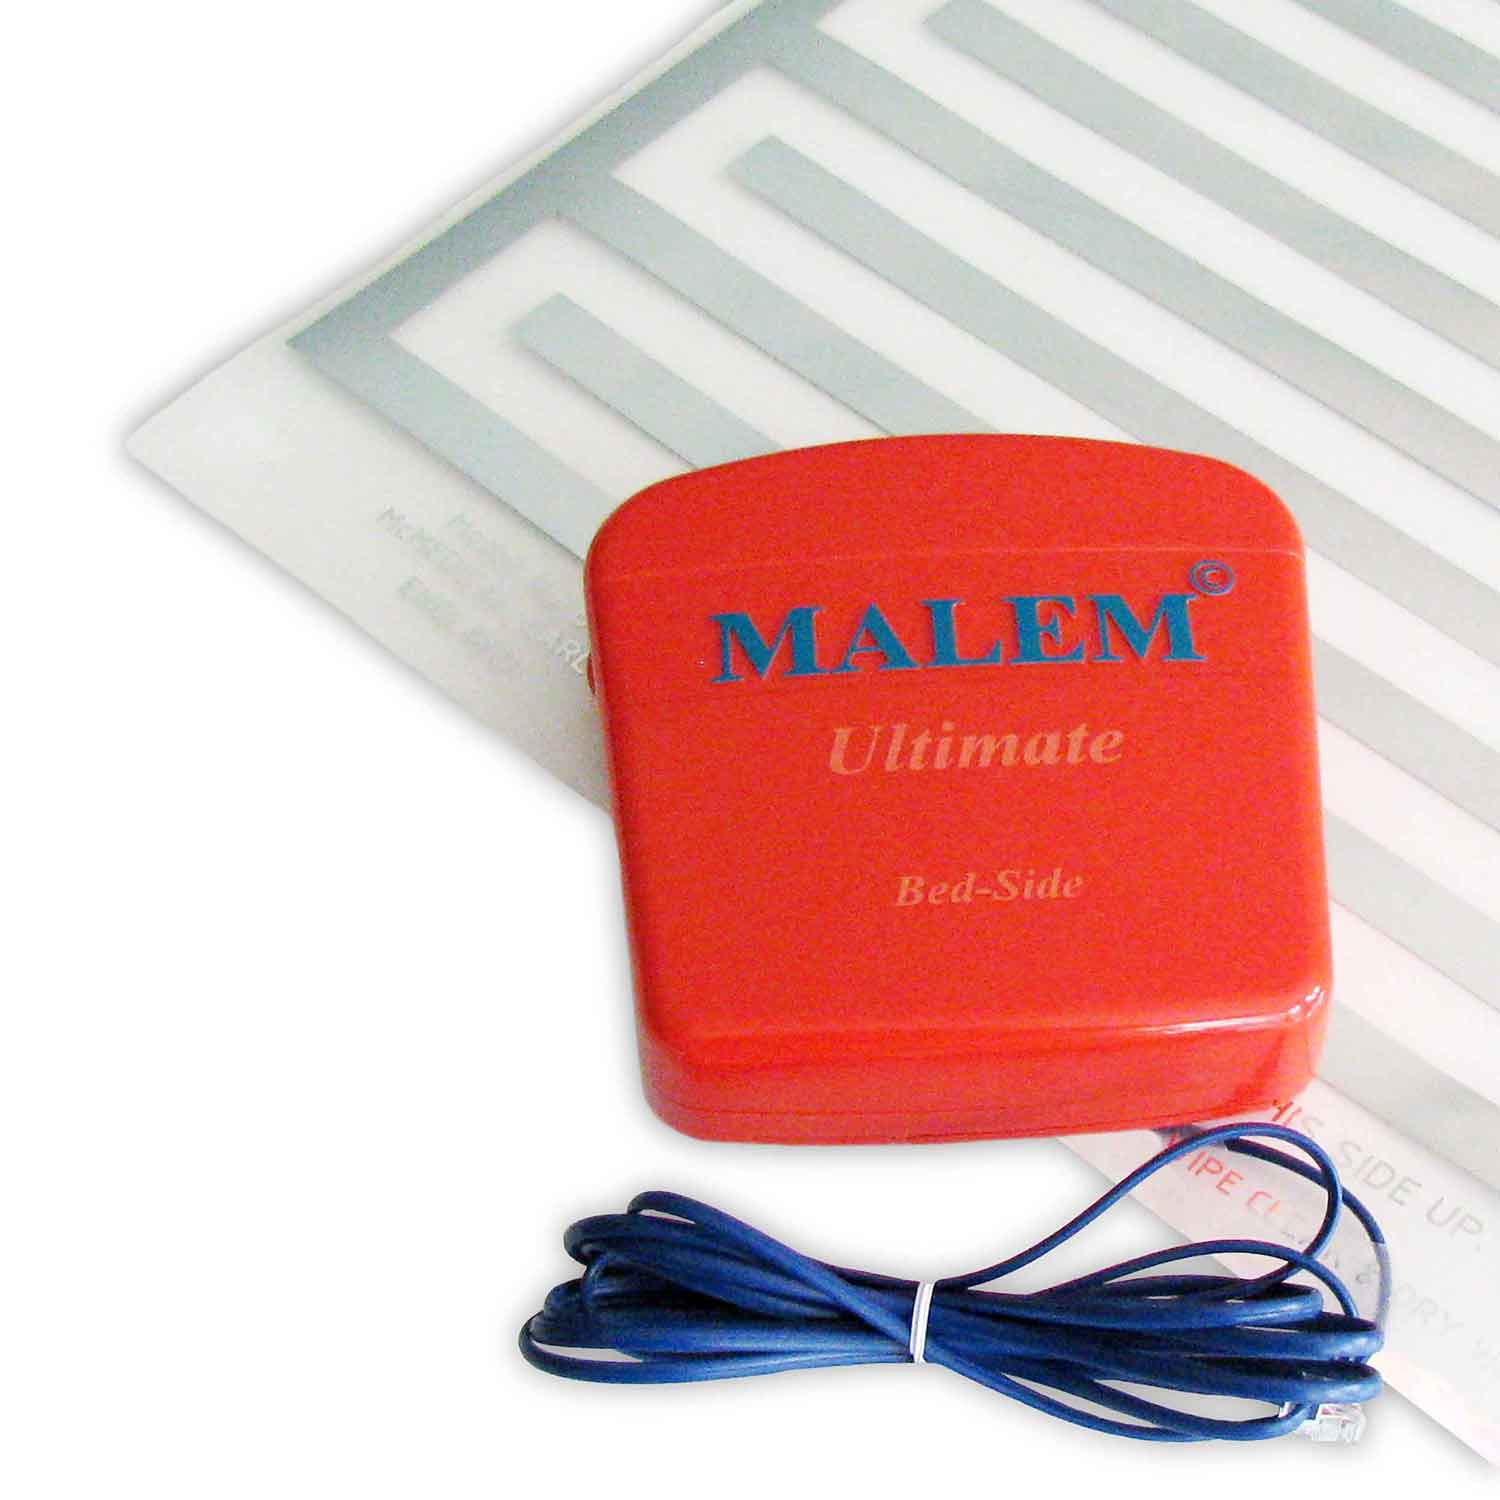 Alarms-Malem ULTIMATE Bed-side Bedwetting Alarm with Pad